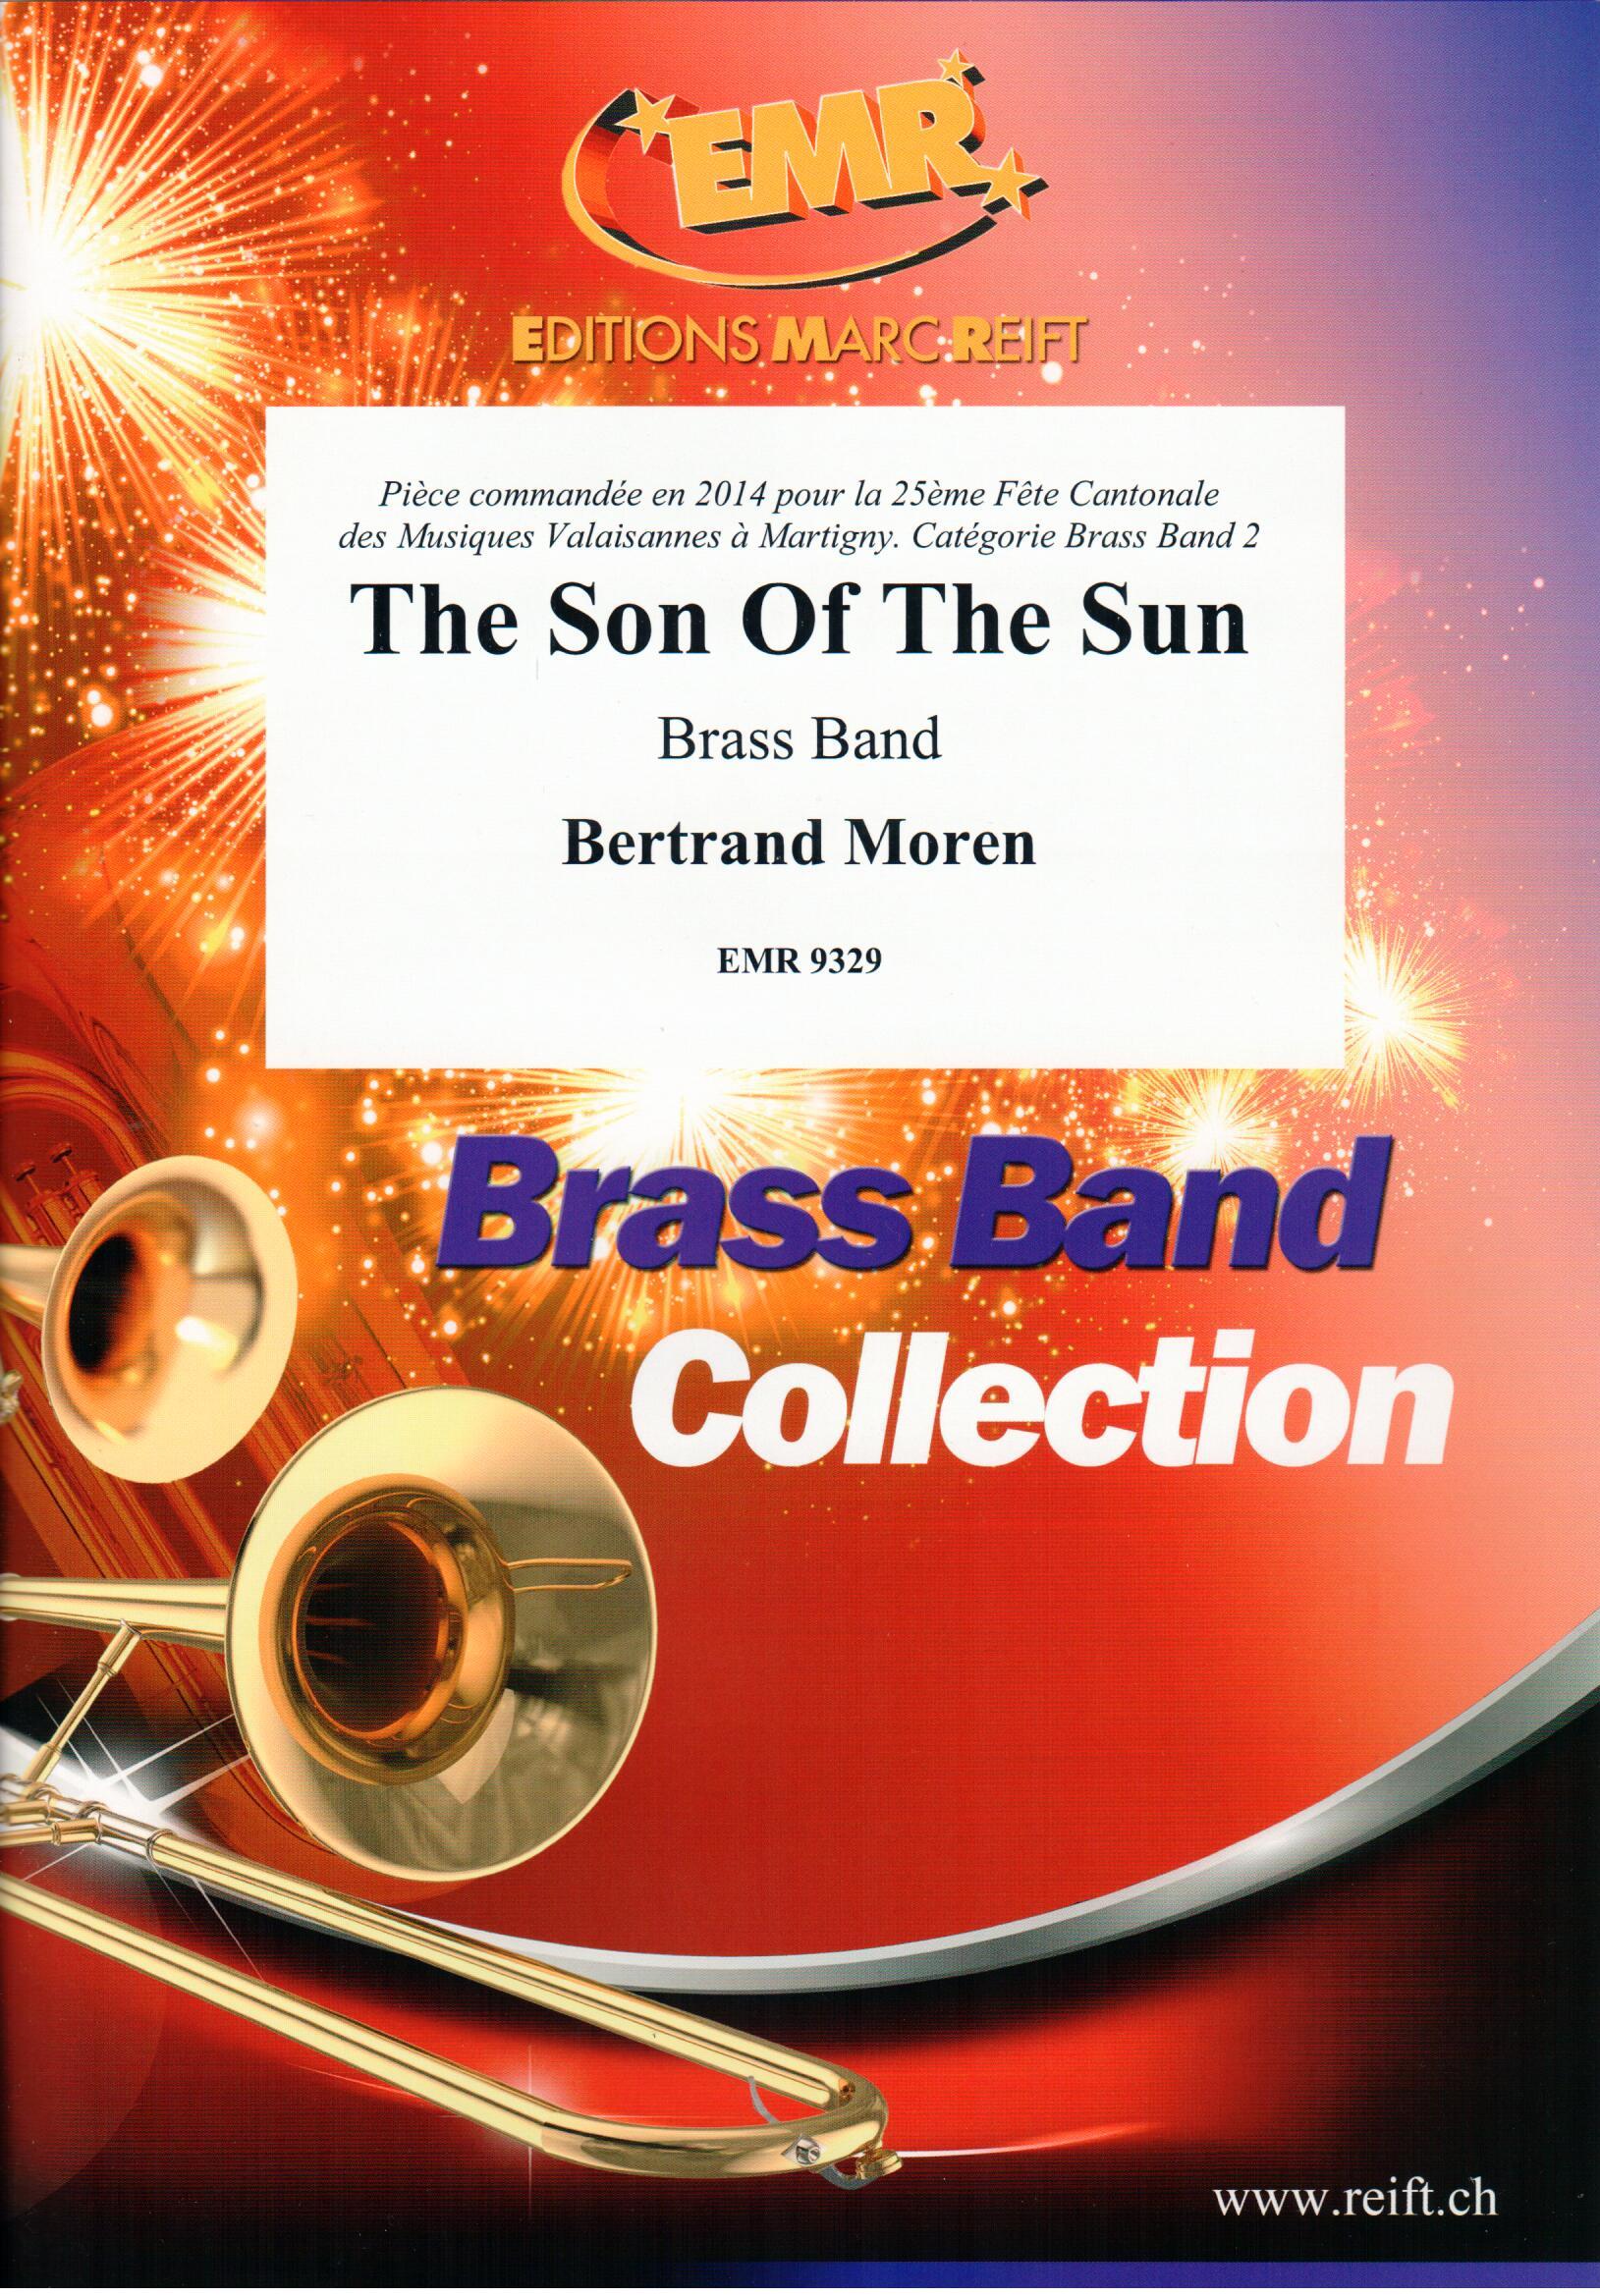 THE SON OF THE SUN, EMR BRASS BAND